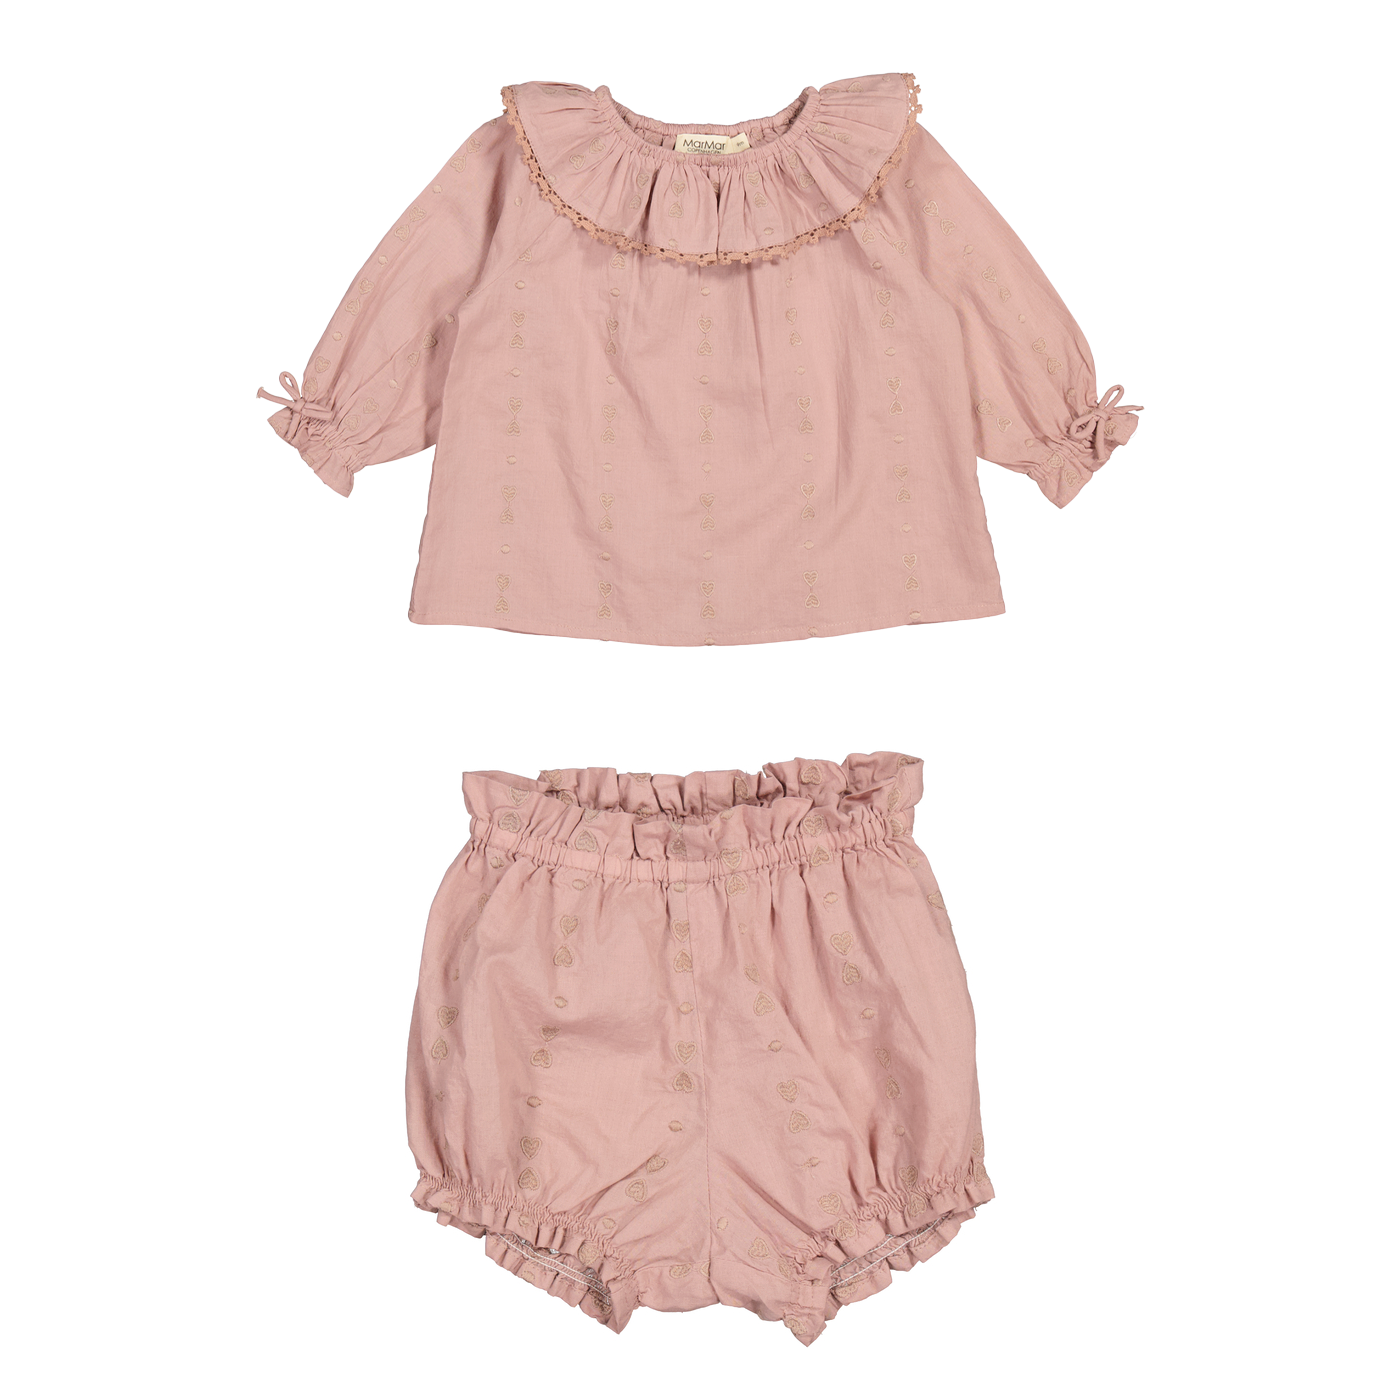 MarMar Tia Pava Blouse & Bloomer Outfit